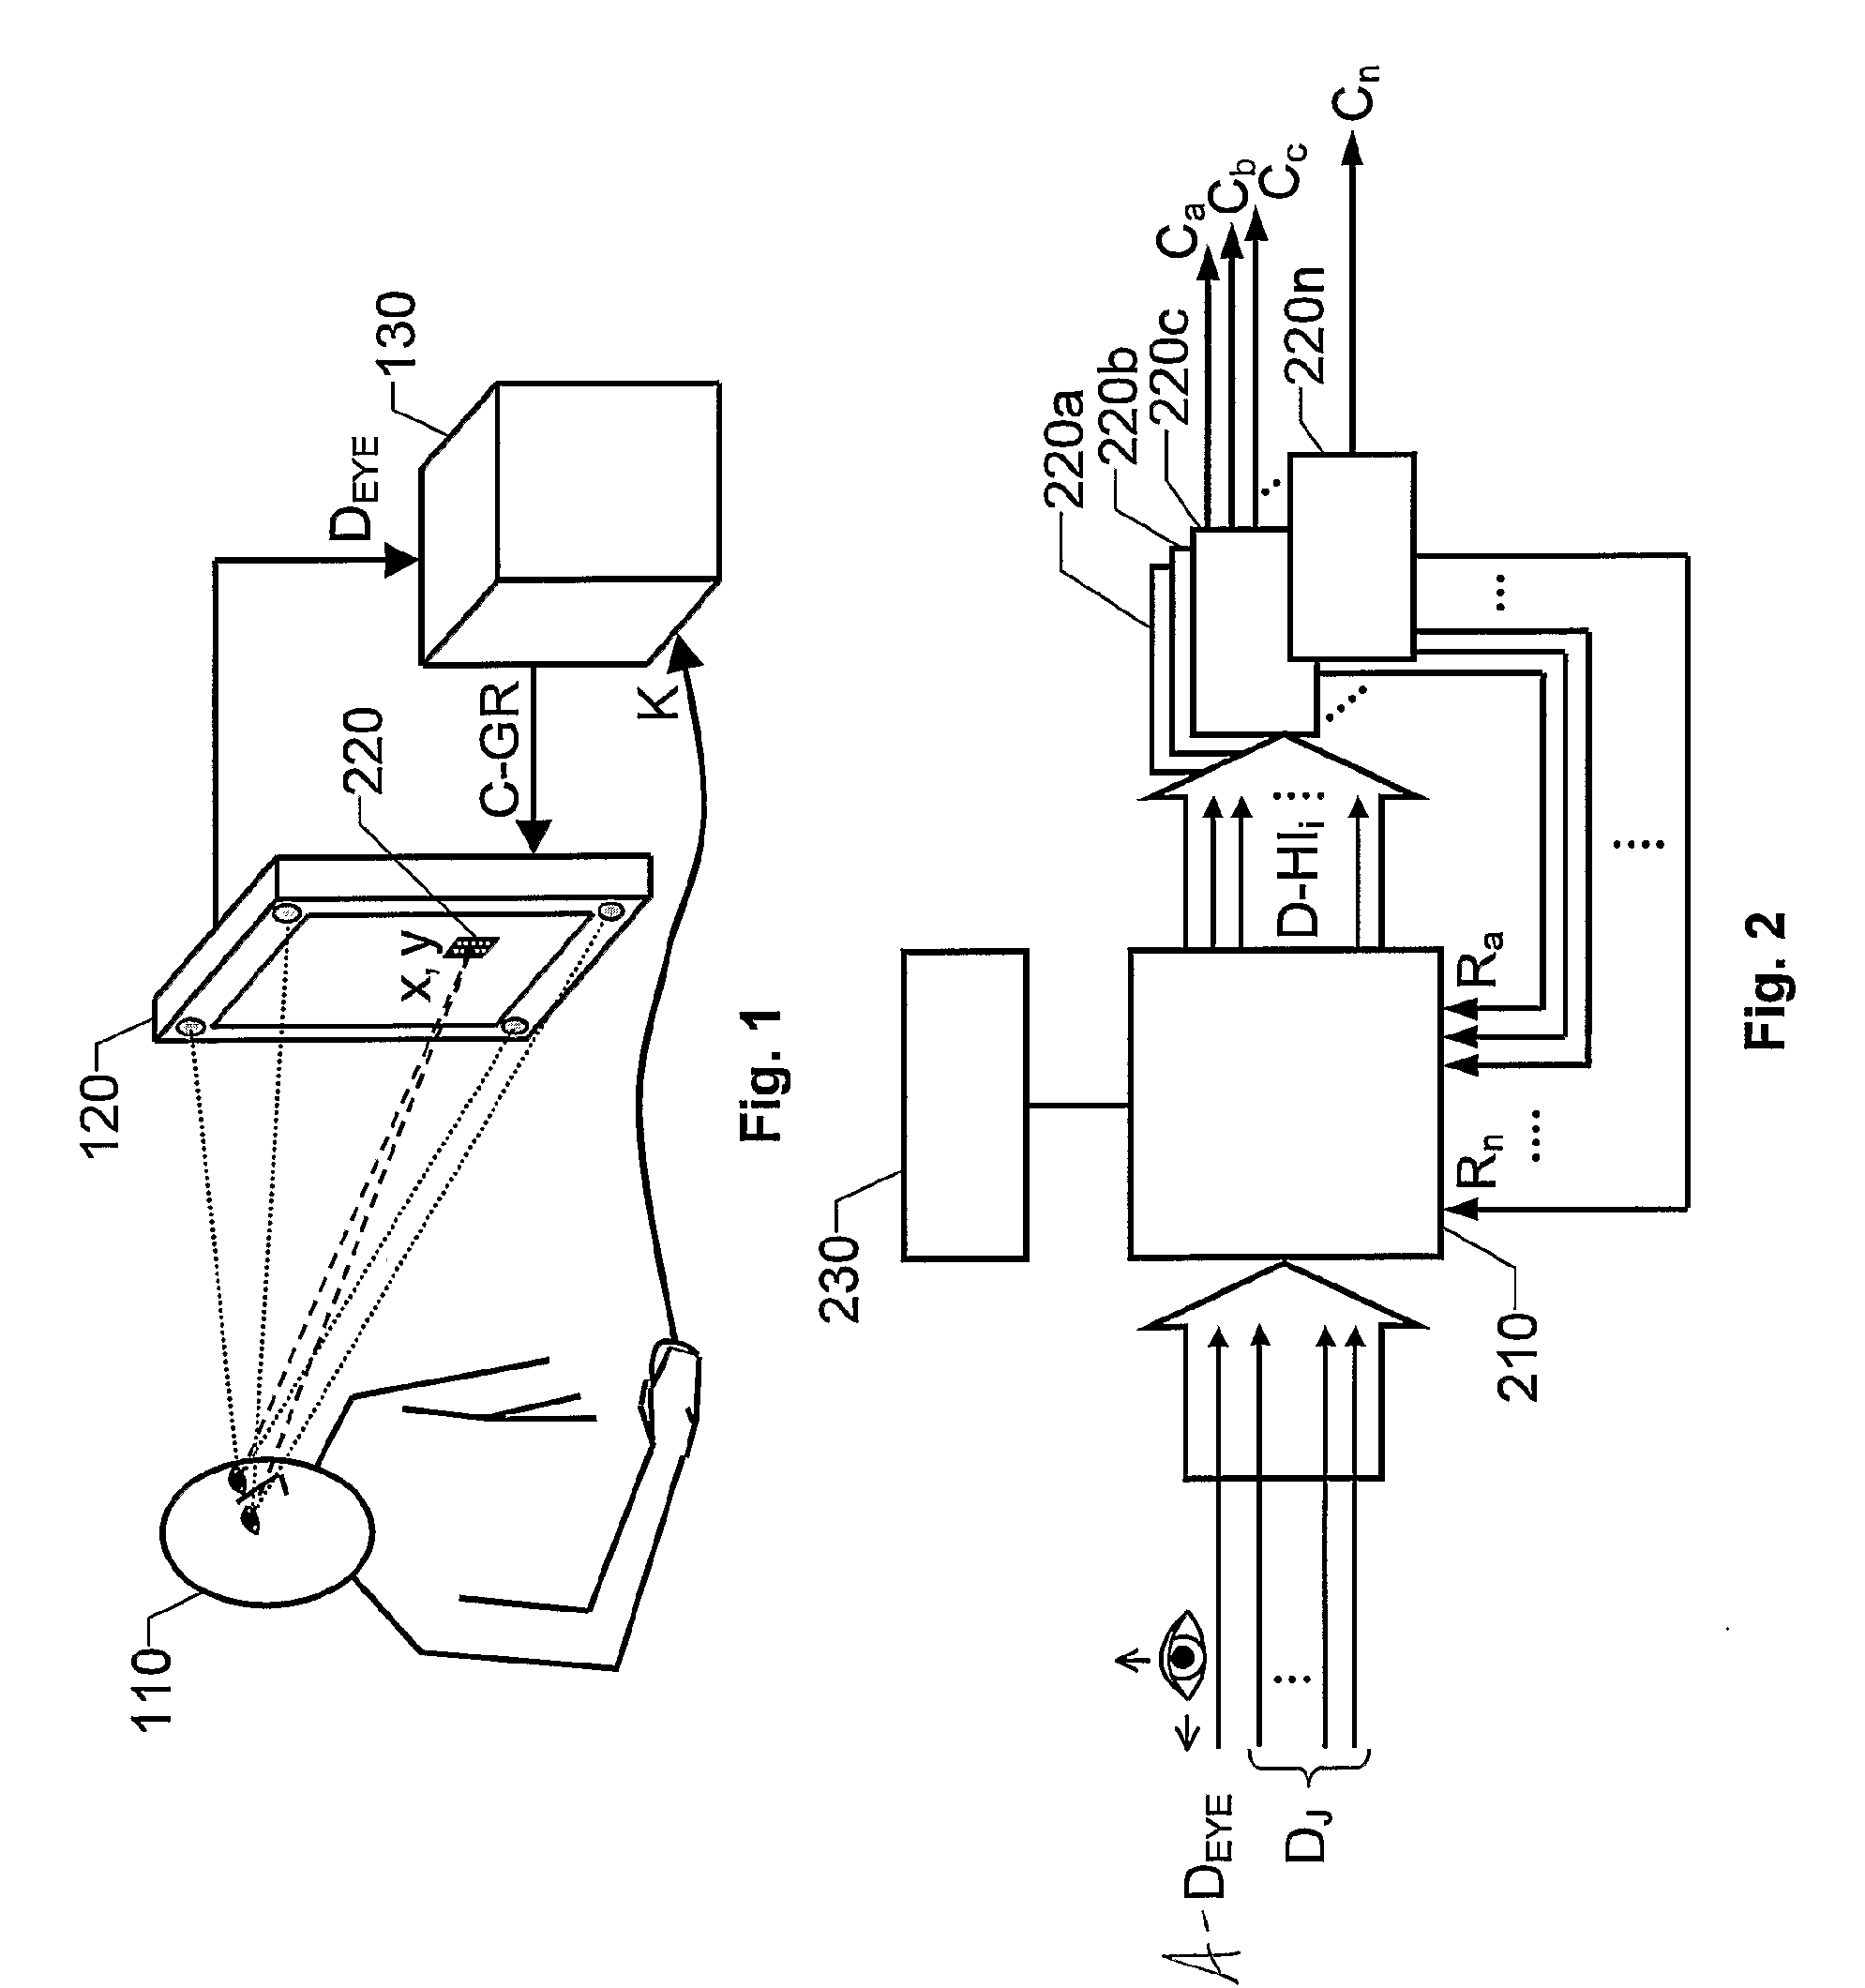 Arrangement, method and computer program for controlling a computer apparatus based on eye-tracking